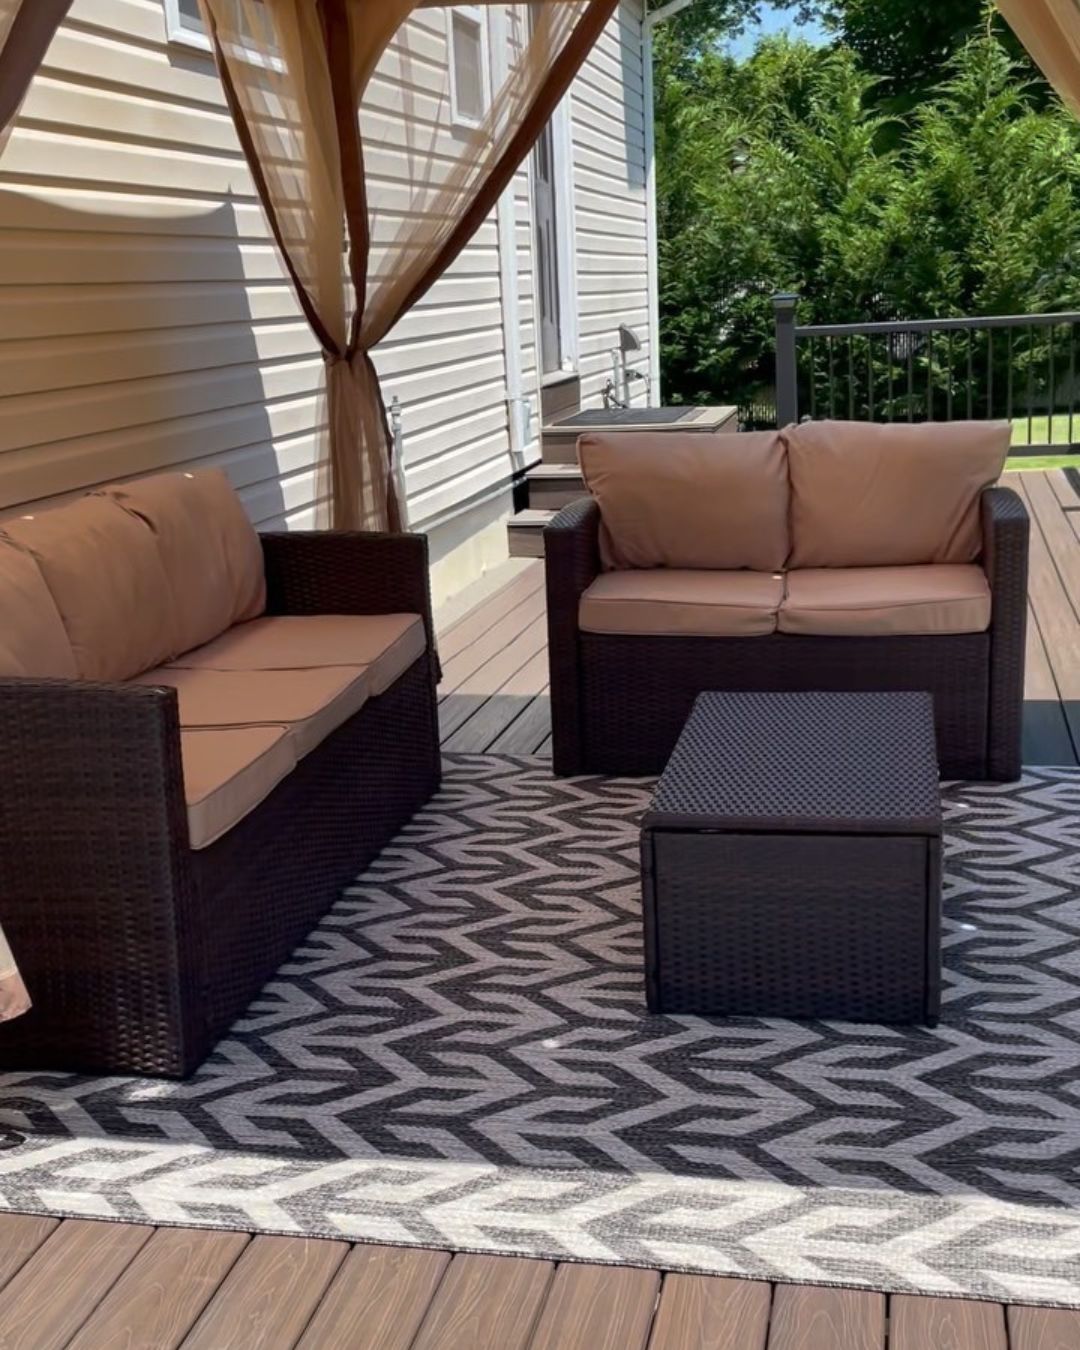  Ample seating, cozy cushions, and a central coffee table create a comfortable space for lounging, and the canopy provides shade for relaxing, even on hot, sunny days. 